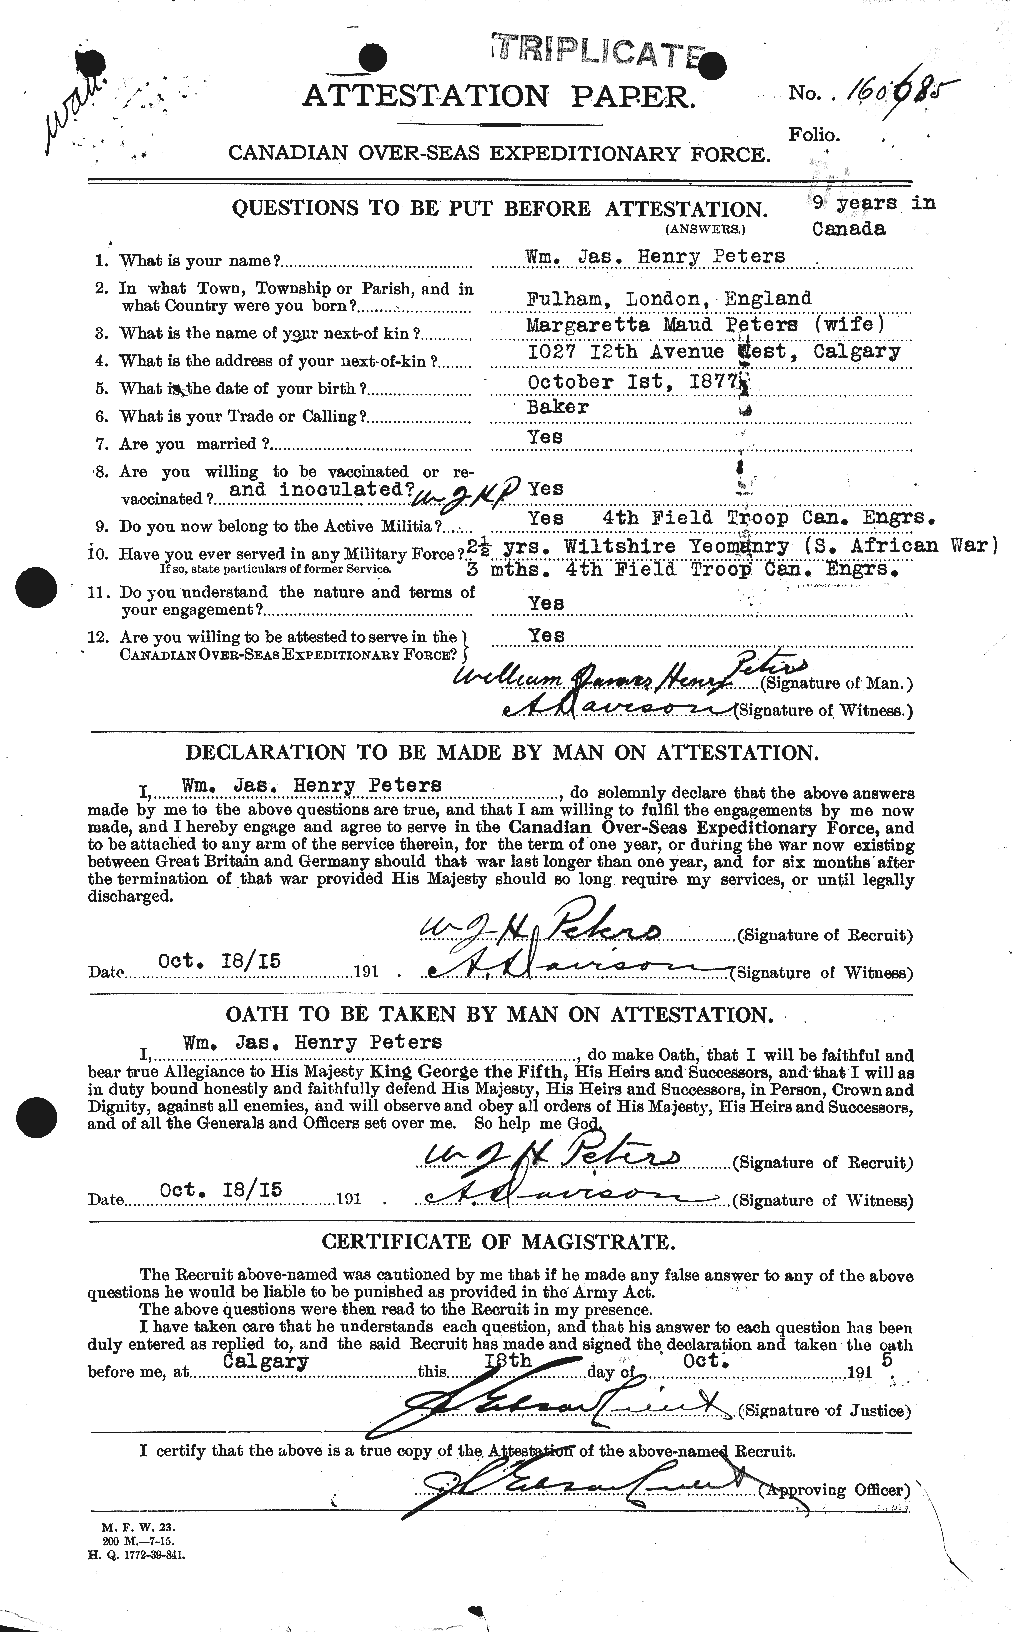 Personnel Records of the First World War - CEF 575661a